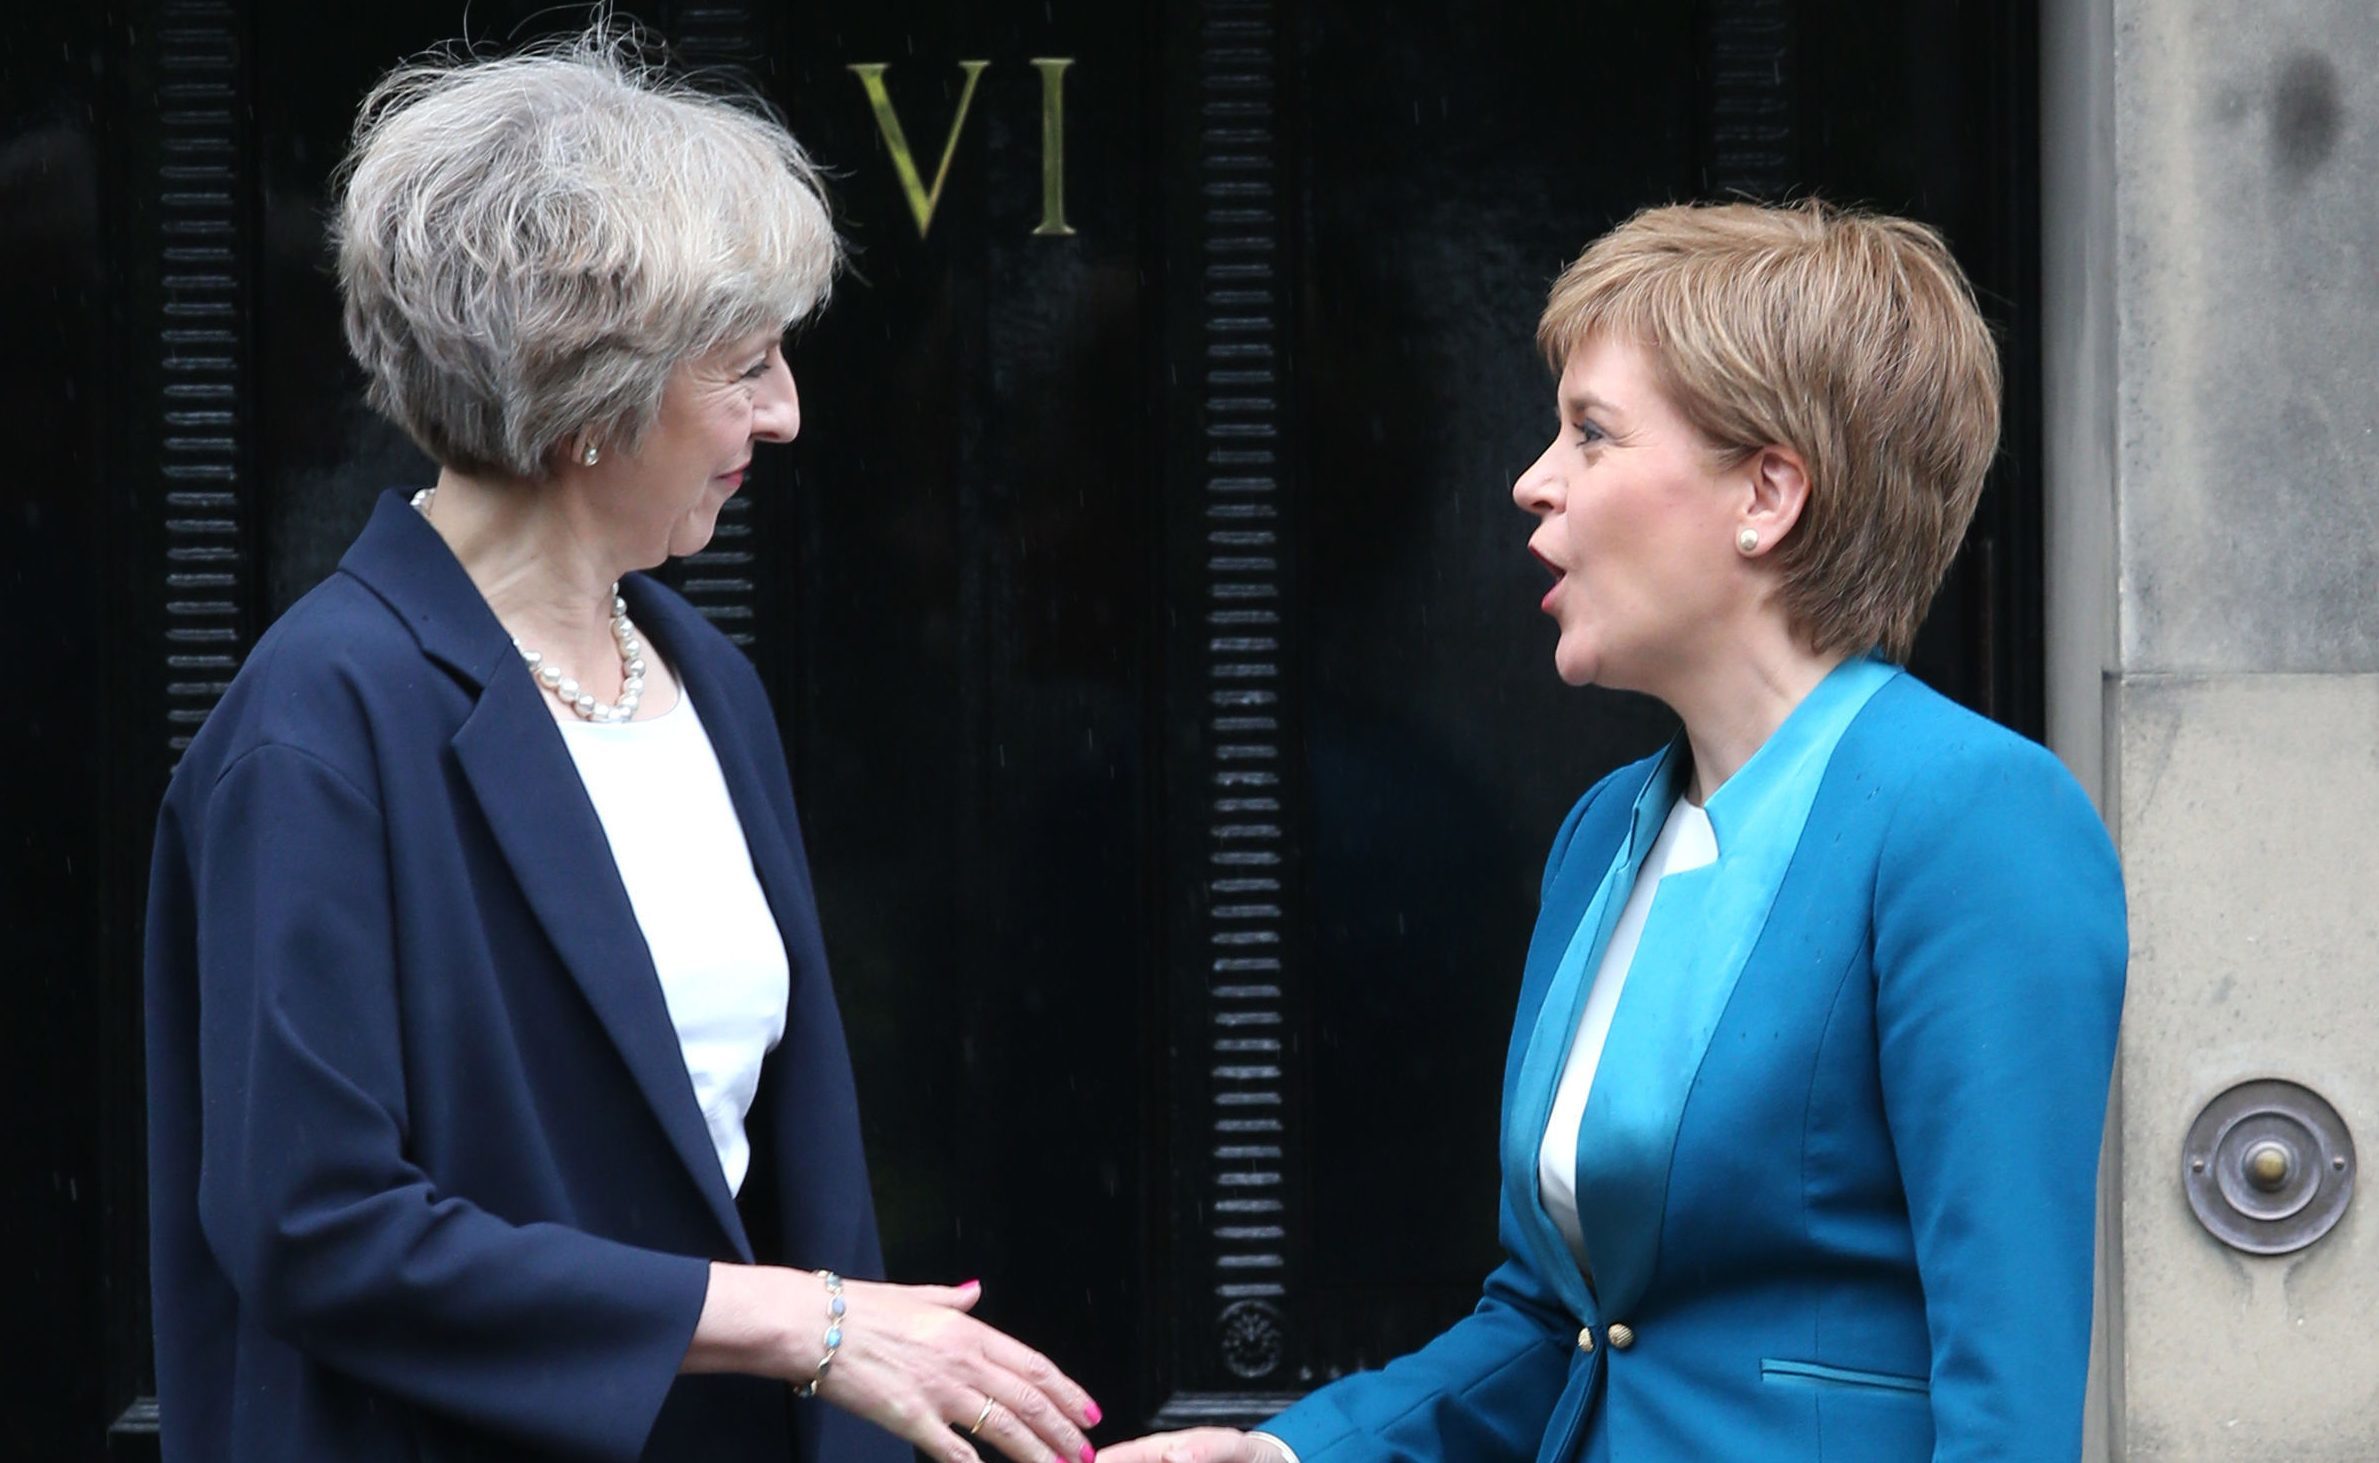 Theresa May (left) meeting Nicola Sturgeon at Bute House in Edinburgh. The First Minister has told the Prime Minister that new Brexit proposals are "urgently needed" with less than a week to go until talks with the European Union begin. (Andrew Milligan/PA Wire)